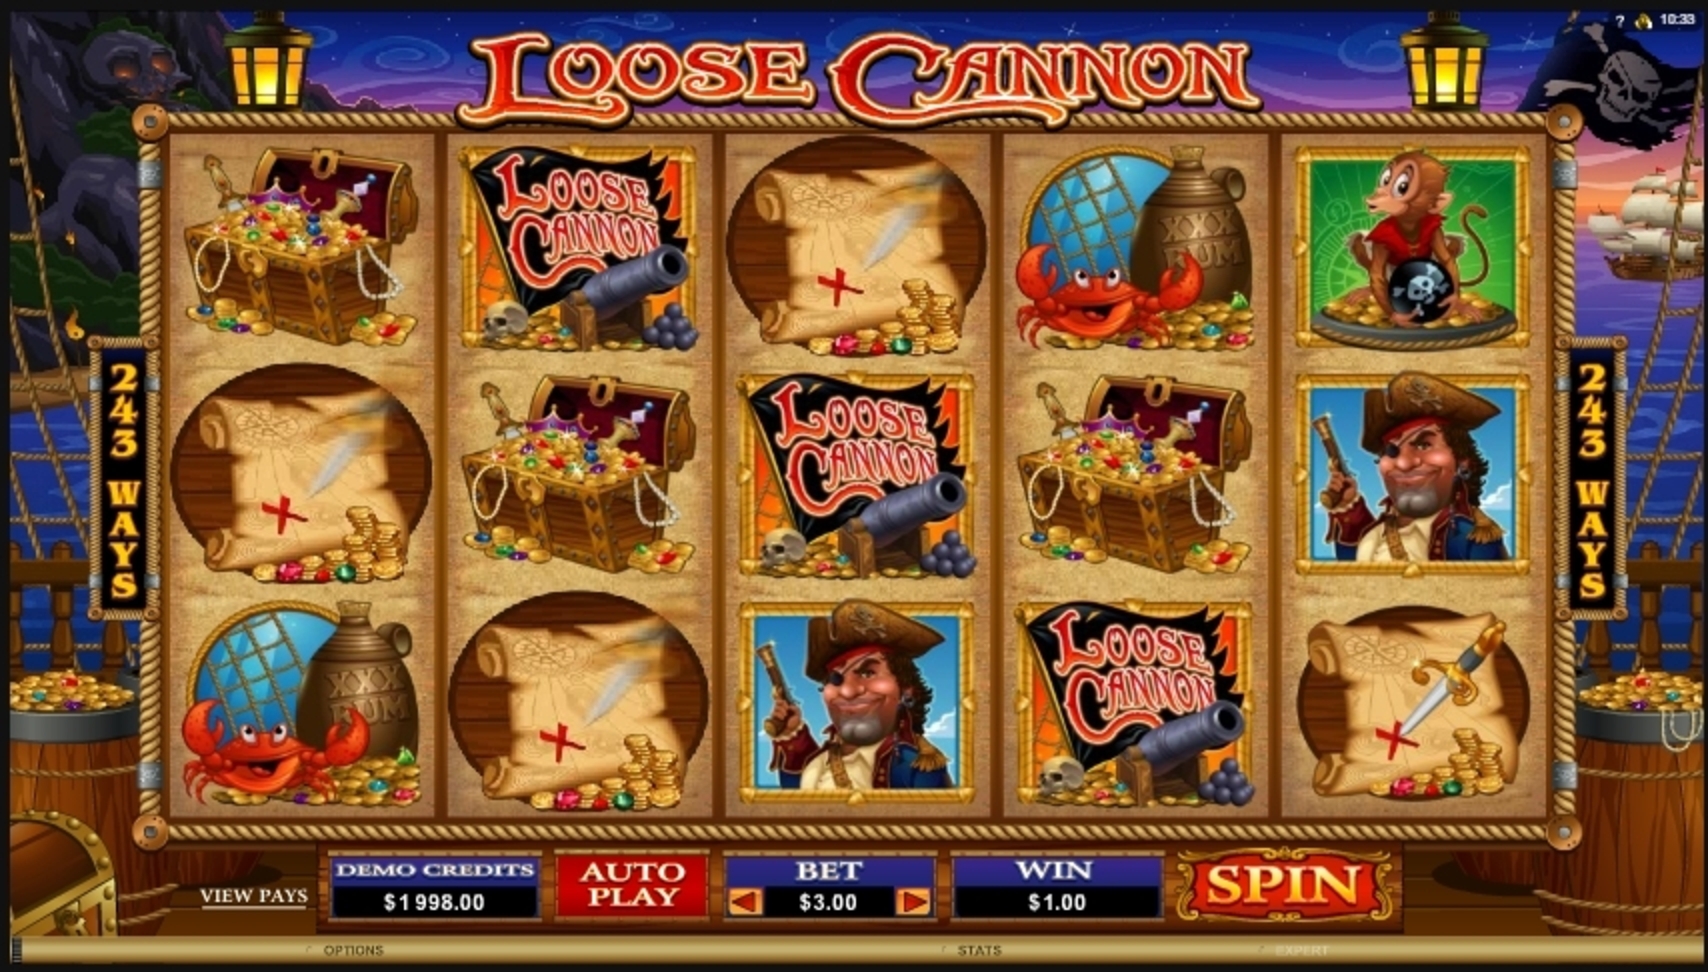 Win Money in Loose Cannon Free Slot Game by Microgaming